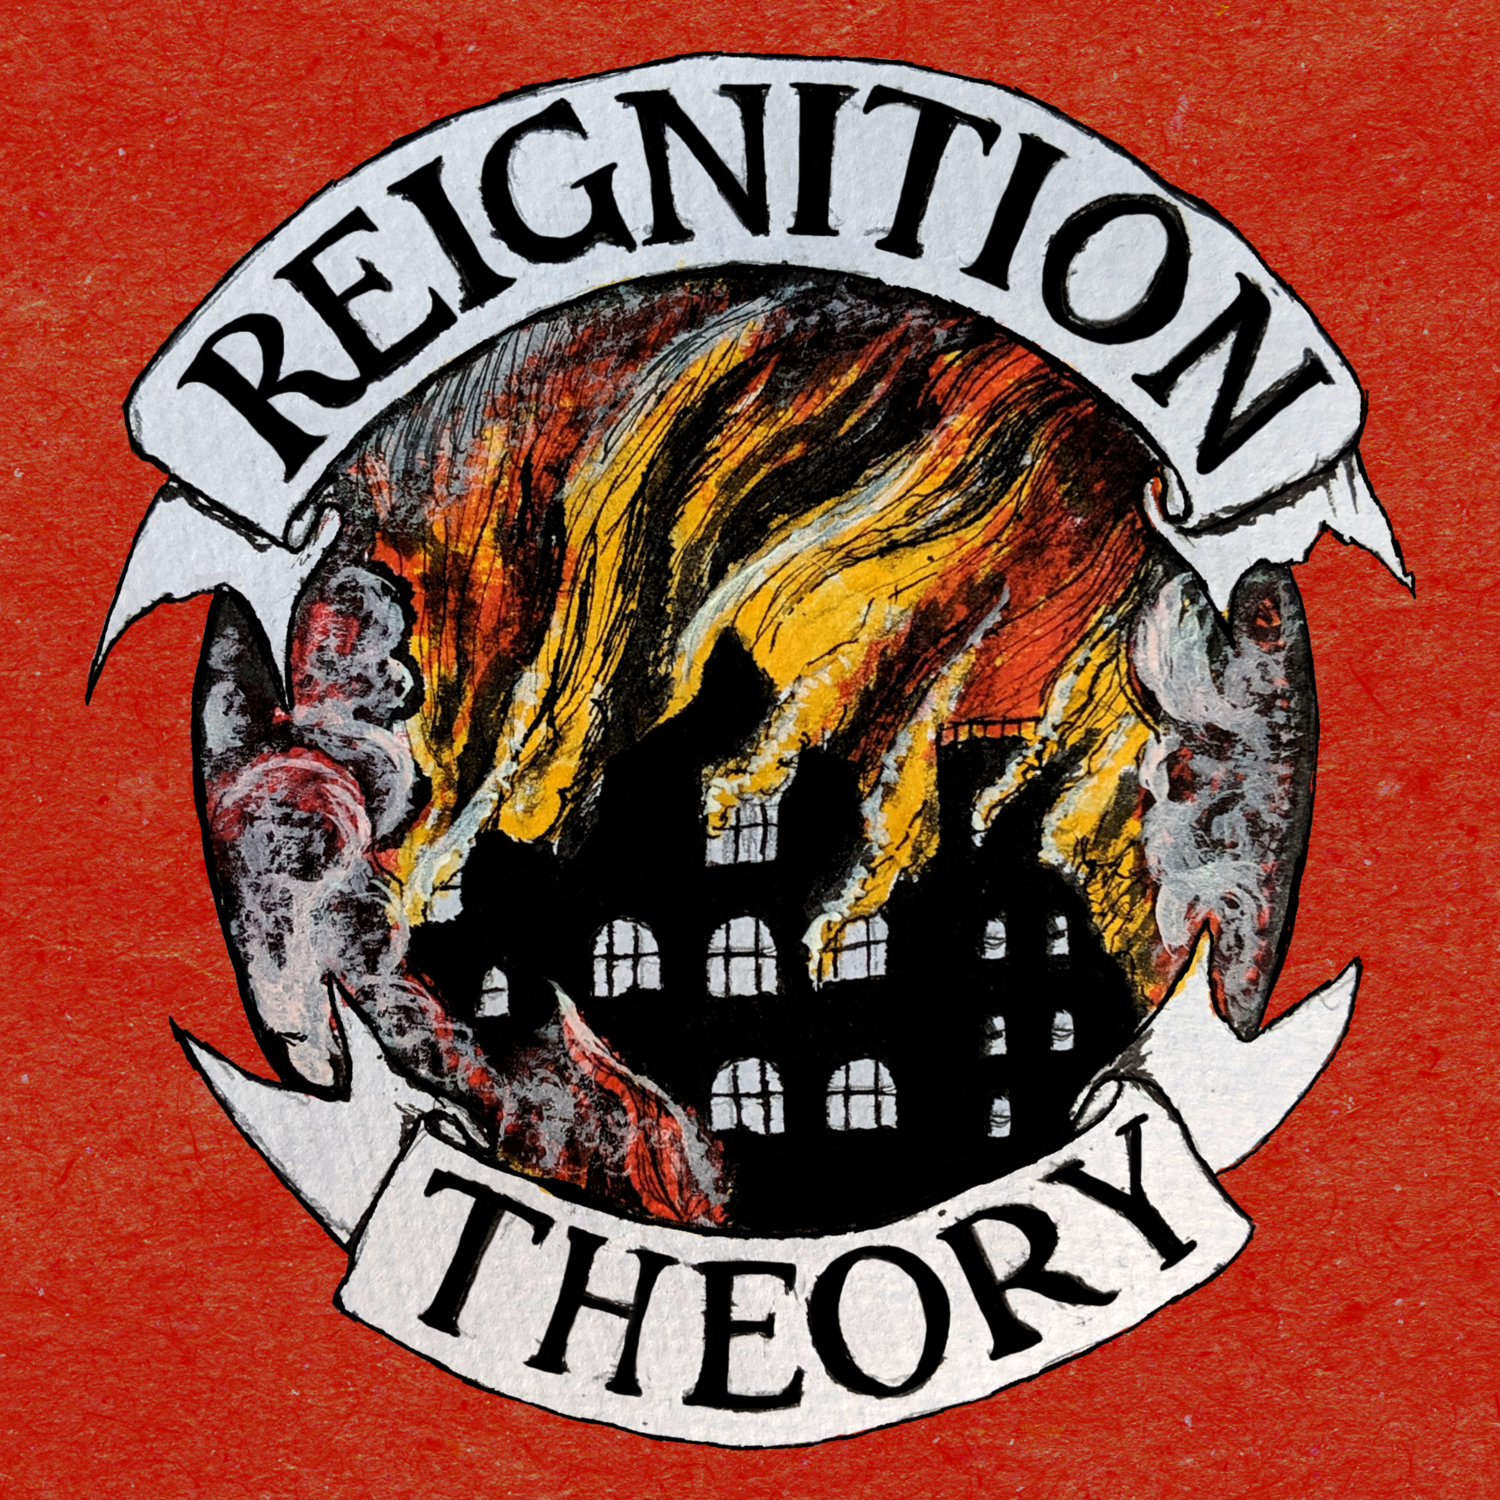 Episode 4 - Revolution - The Reignition Theory